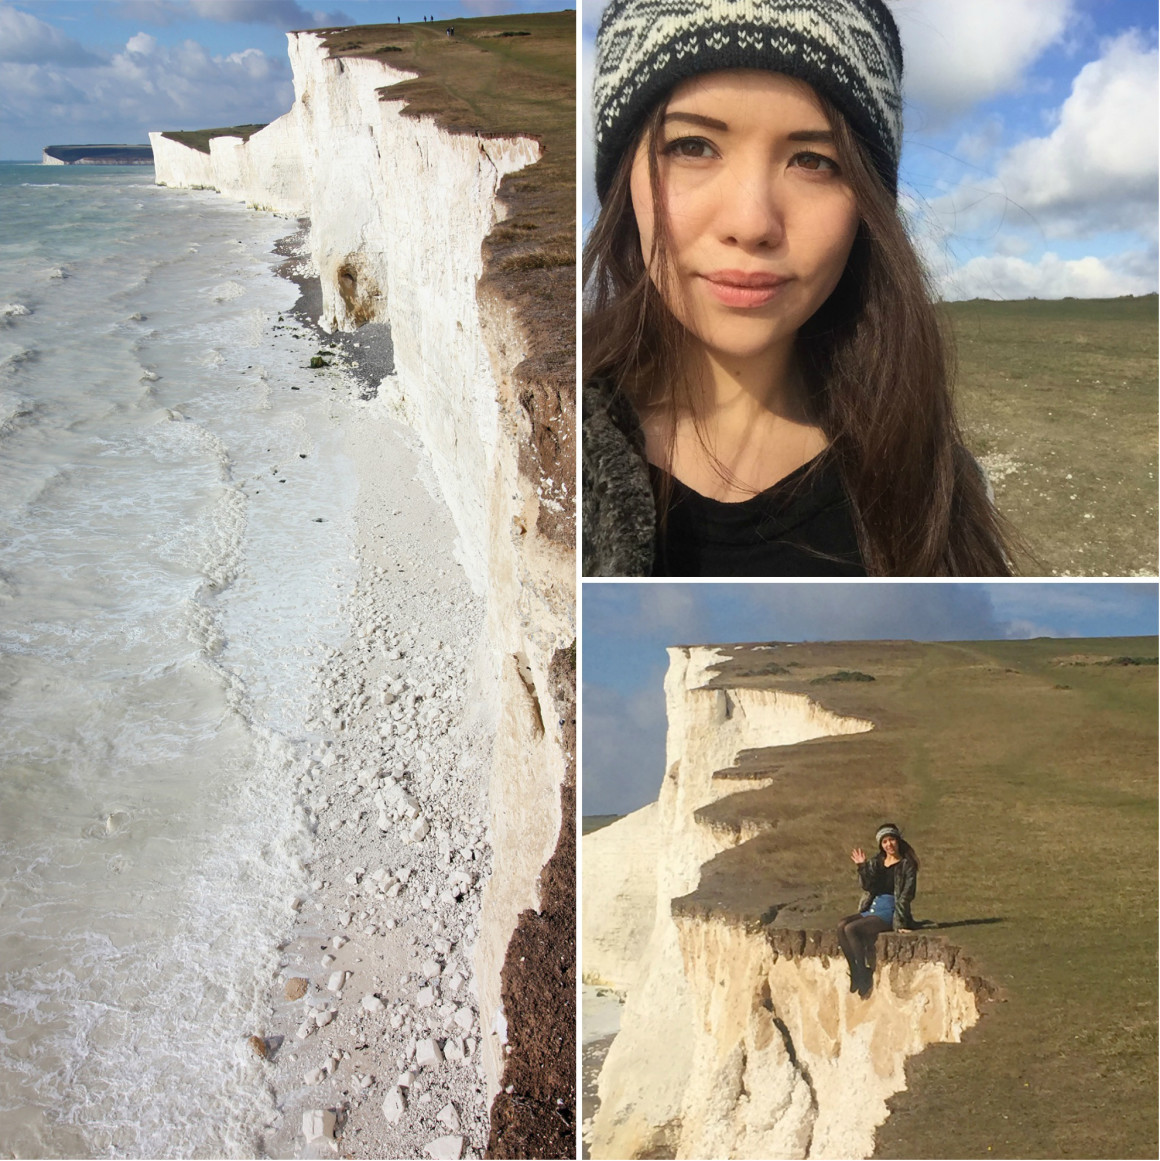 The Chalk Cliffs at Seven Sisters, England